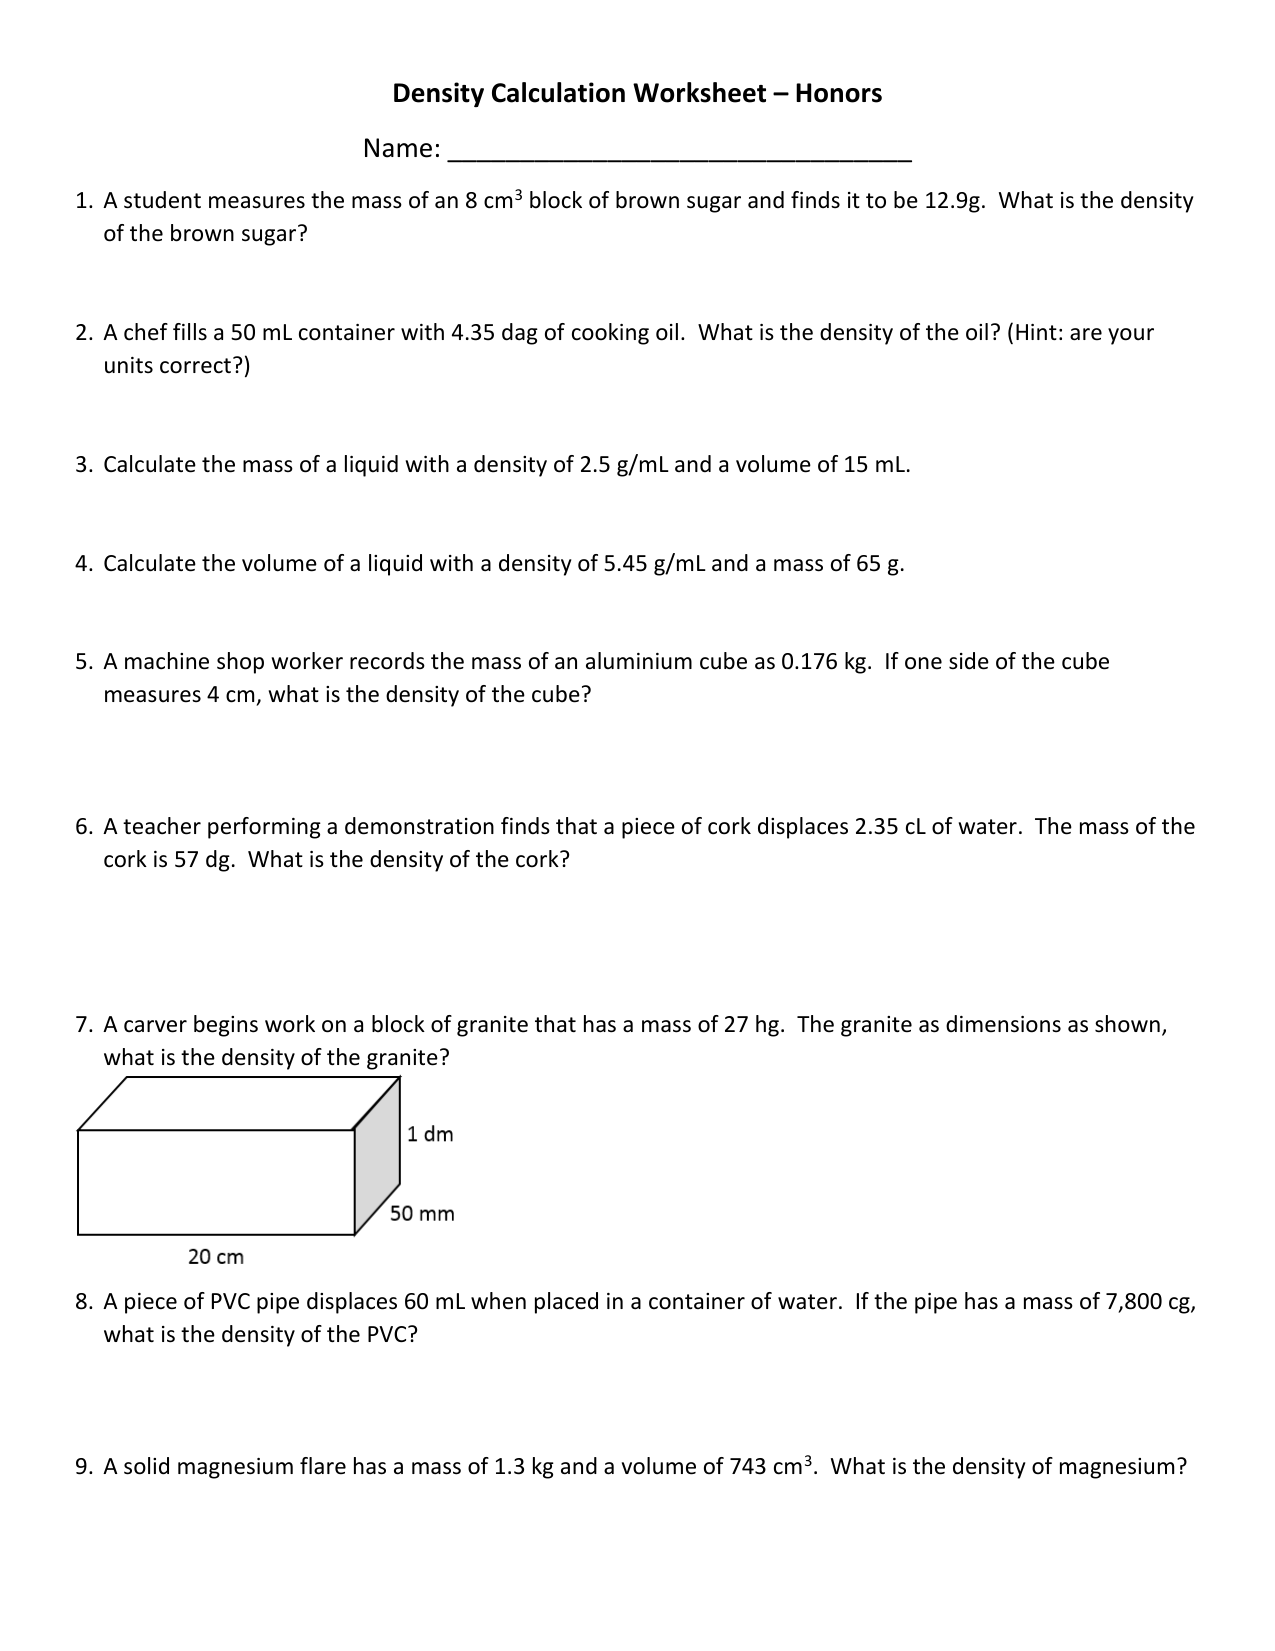 Density Calculation Worksheet – Honors Name: With Density Calculations Worksheet 1